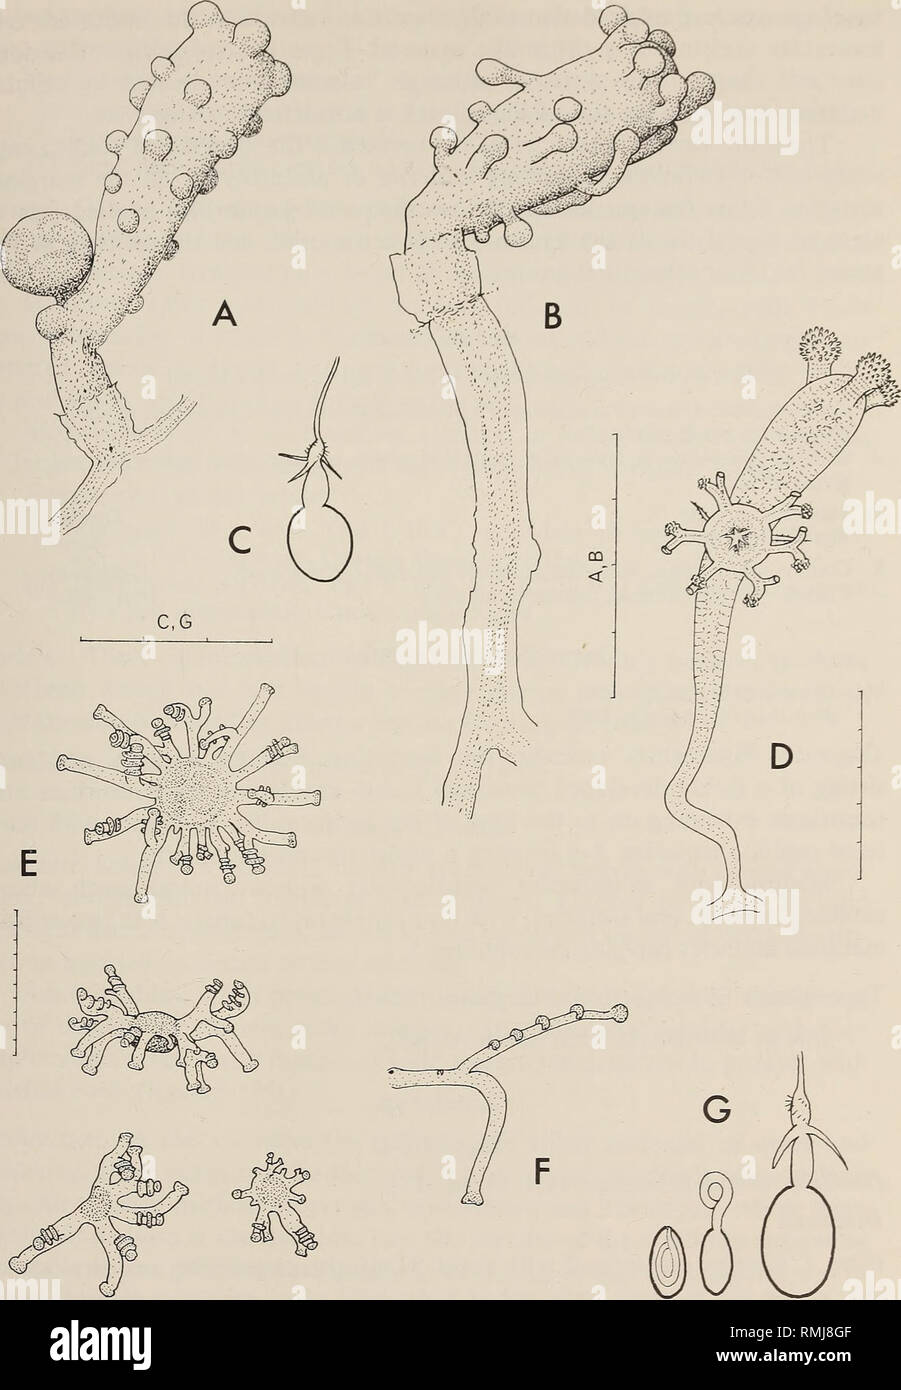 . Annals of the South African Museum = Annale van die Suid-Afrikaanse Museum. Natural history. MONOGRAPH ON THE HYDROIDA OF SOUTHERN AFRICA 67. Fig. 23. Zanclea sp. A, hydranth of Form 2; B, hydranth of Form 1; C, stenotele. Staurocladia vallentini. D, hydranth with medusa-bud, redrawn from Gilchrist (1919, as Cnidonema capensis); E, young medusae, the upper one is about to divide and has three hypostomes, the lower three have recently divided; F, a single tentacle from medusa; G, nematocysts of medusa, from left to right an undischarged and a discharged des- moneme, stenotele. Scale: C and G  Stock Photo